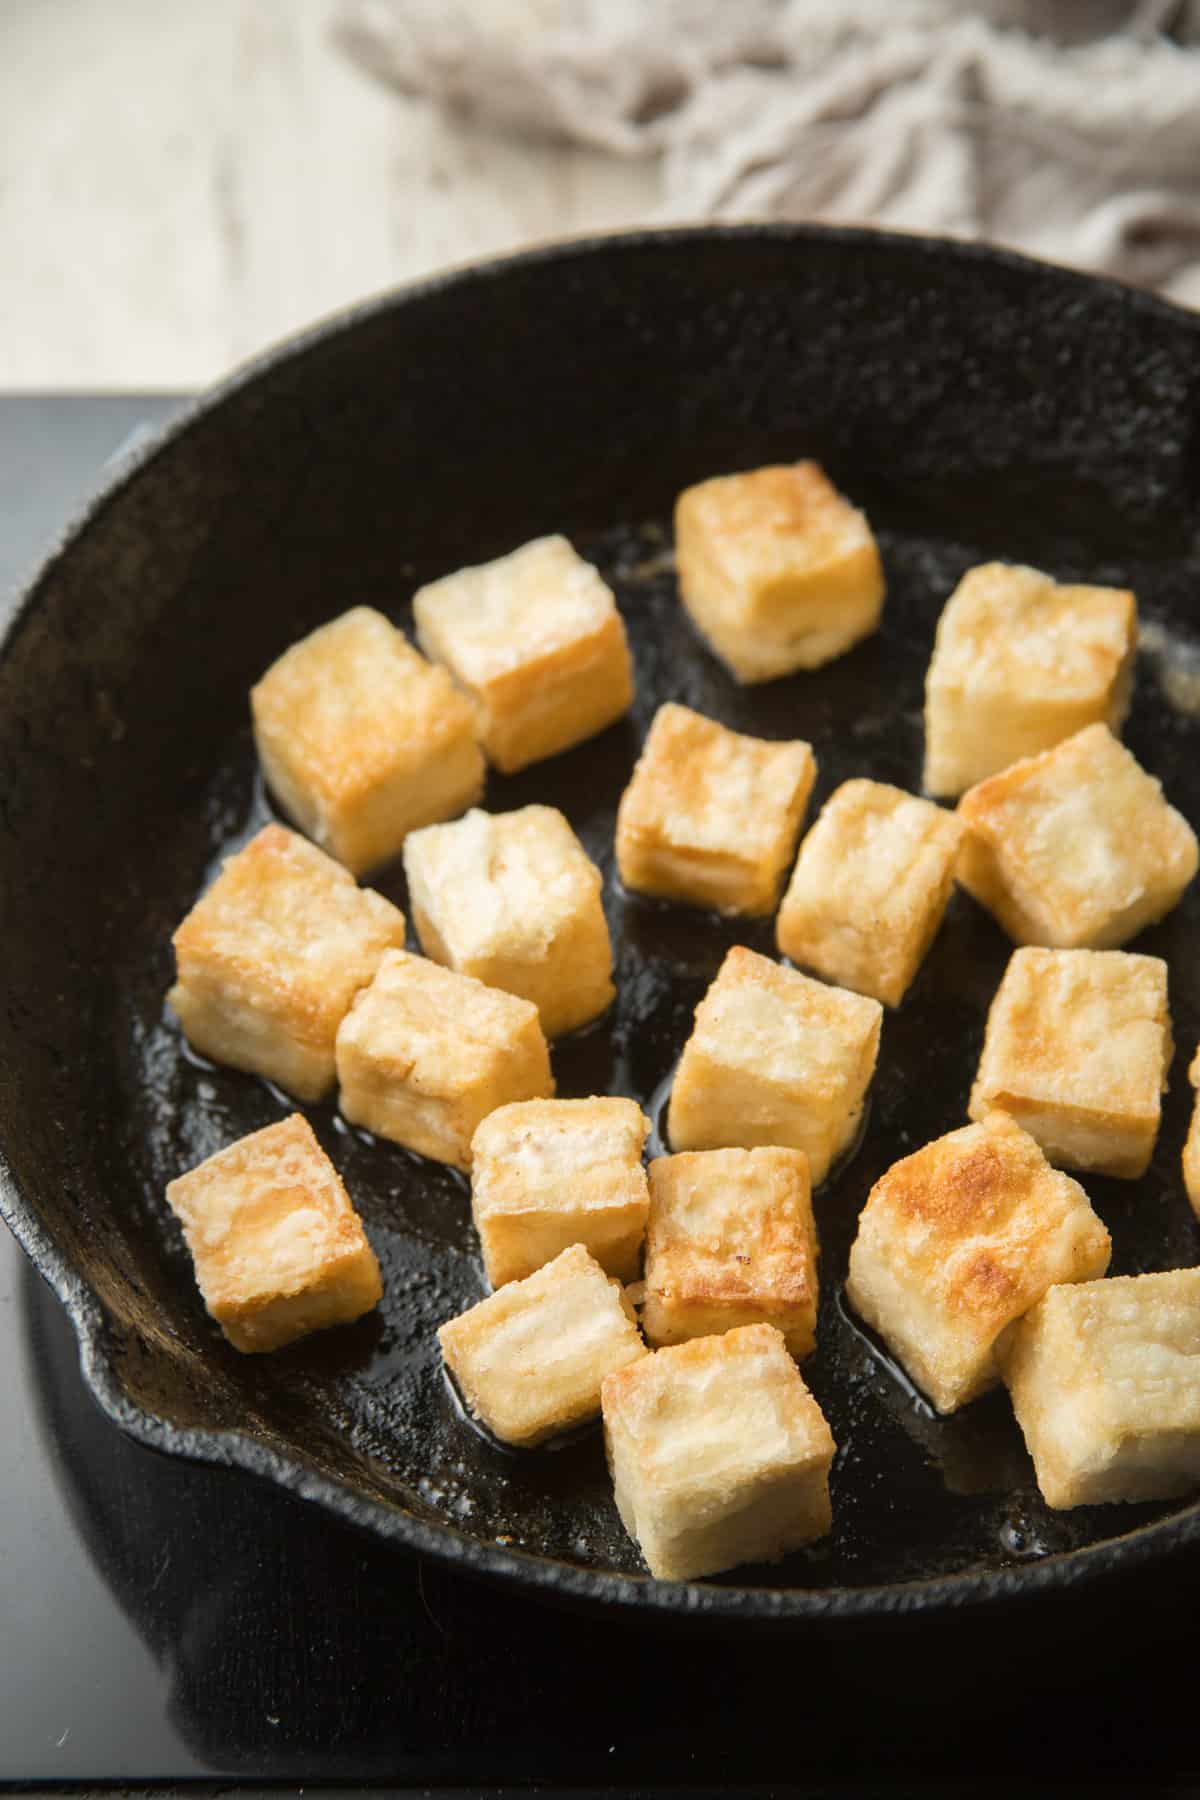 Tofu pieces frying in a skillet.